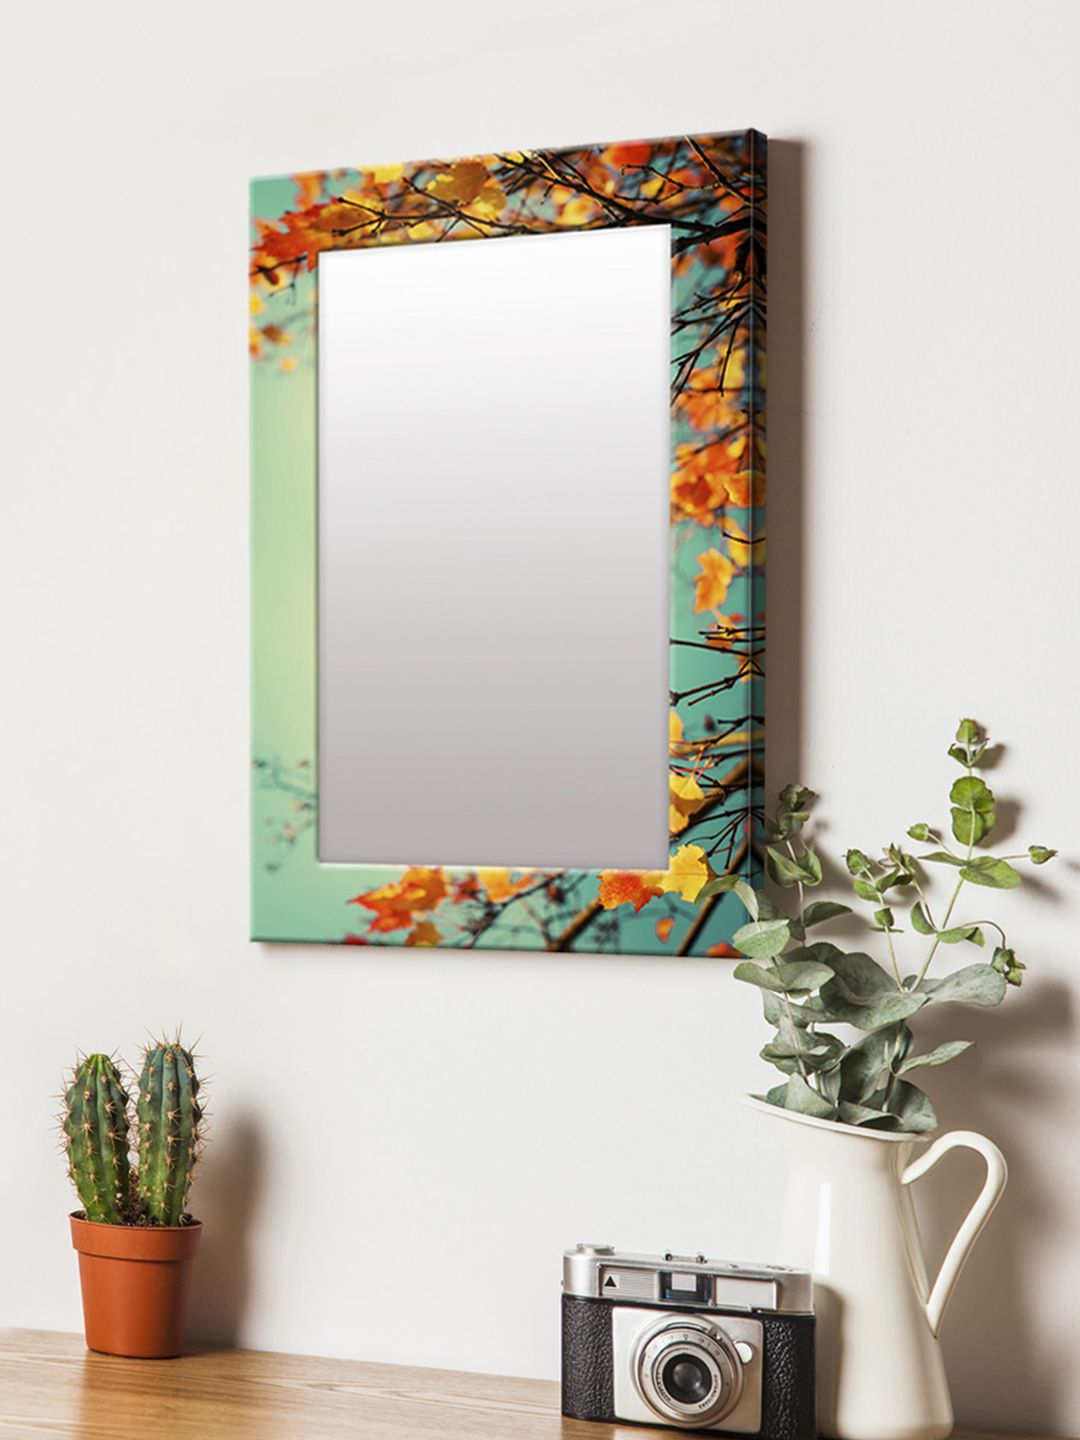 999Store Yellow & Green Printed MDF Wall Mirror Price in India